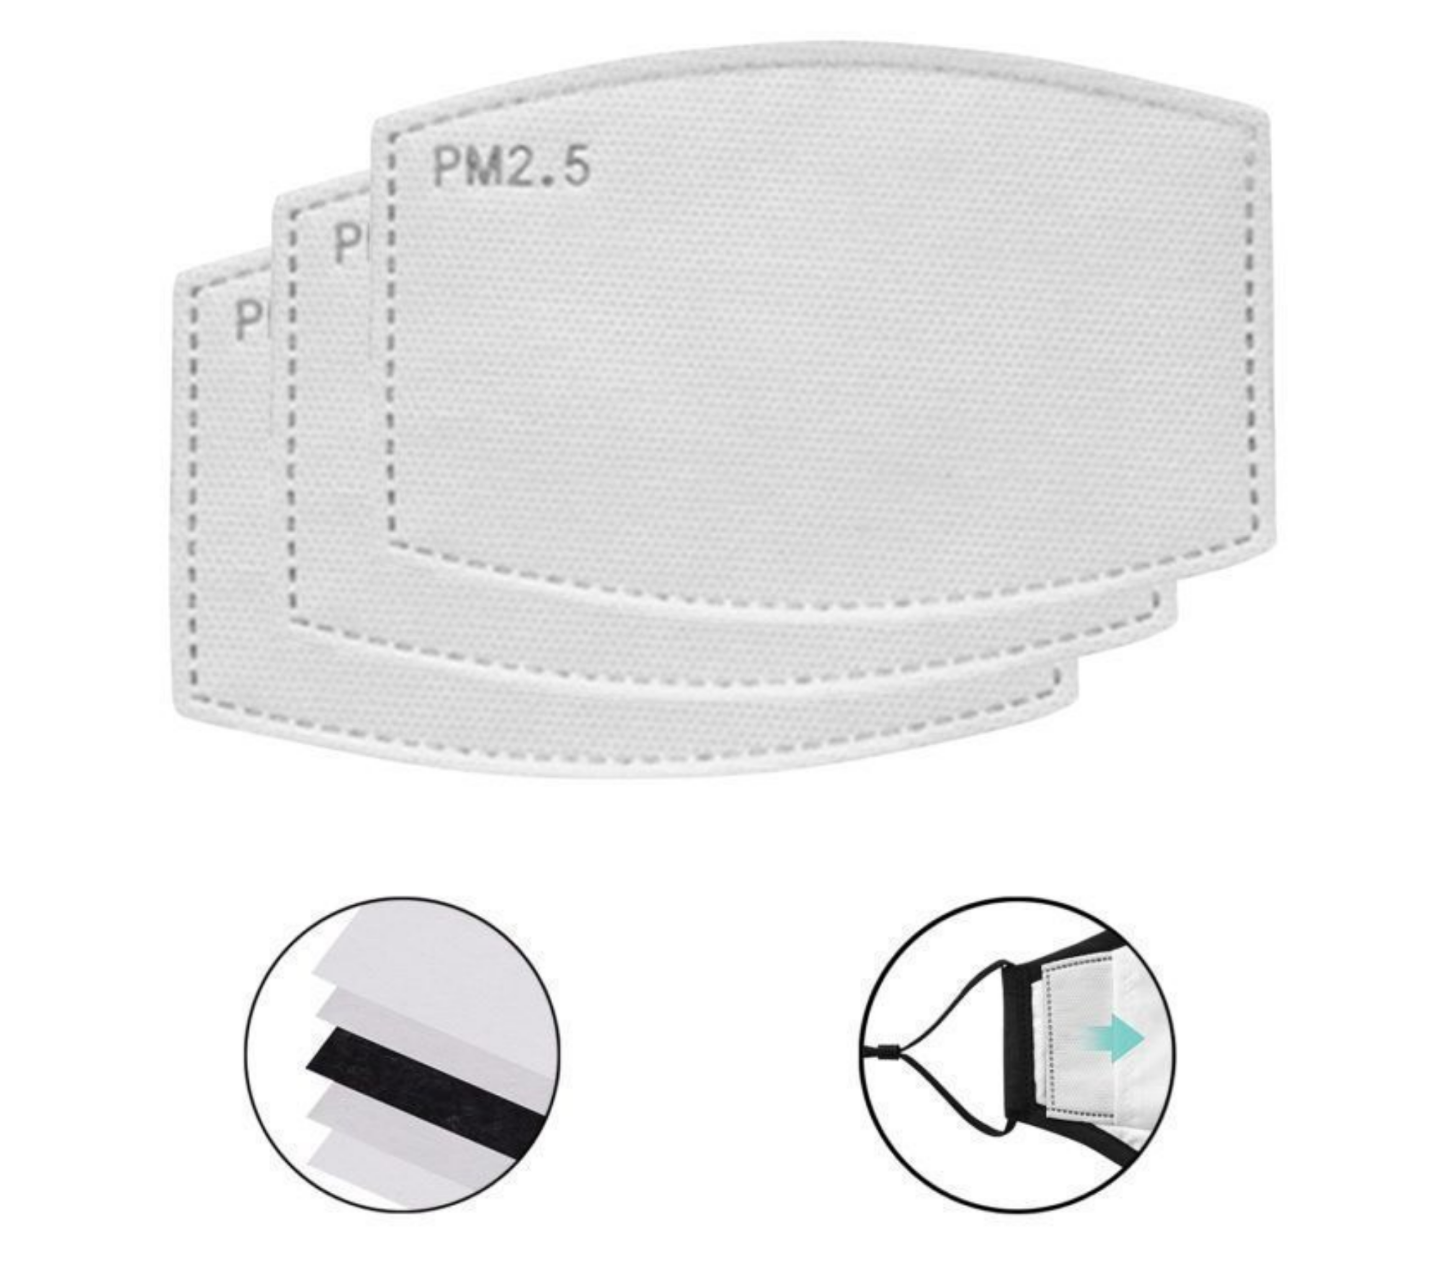 Pack 10 PM2.5 Carbon Filter For Cloth Face Mask. Pack-1, Pack-3, Pack-5, Pack-10, Pack-20 Options